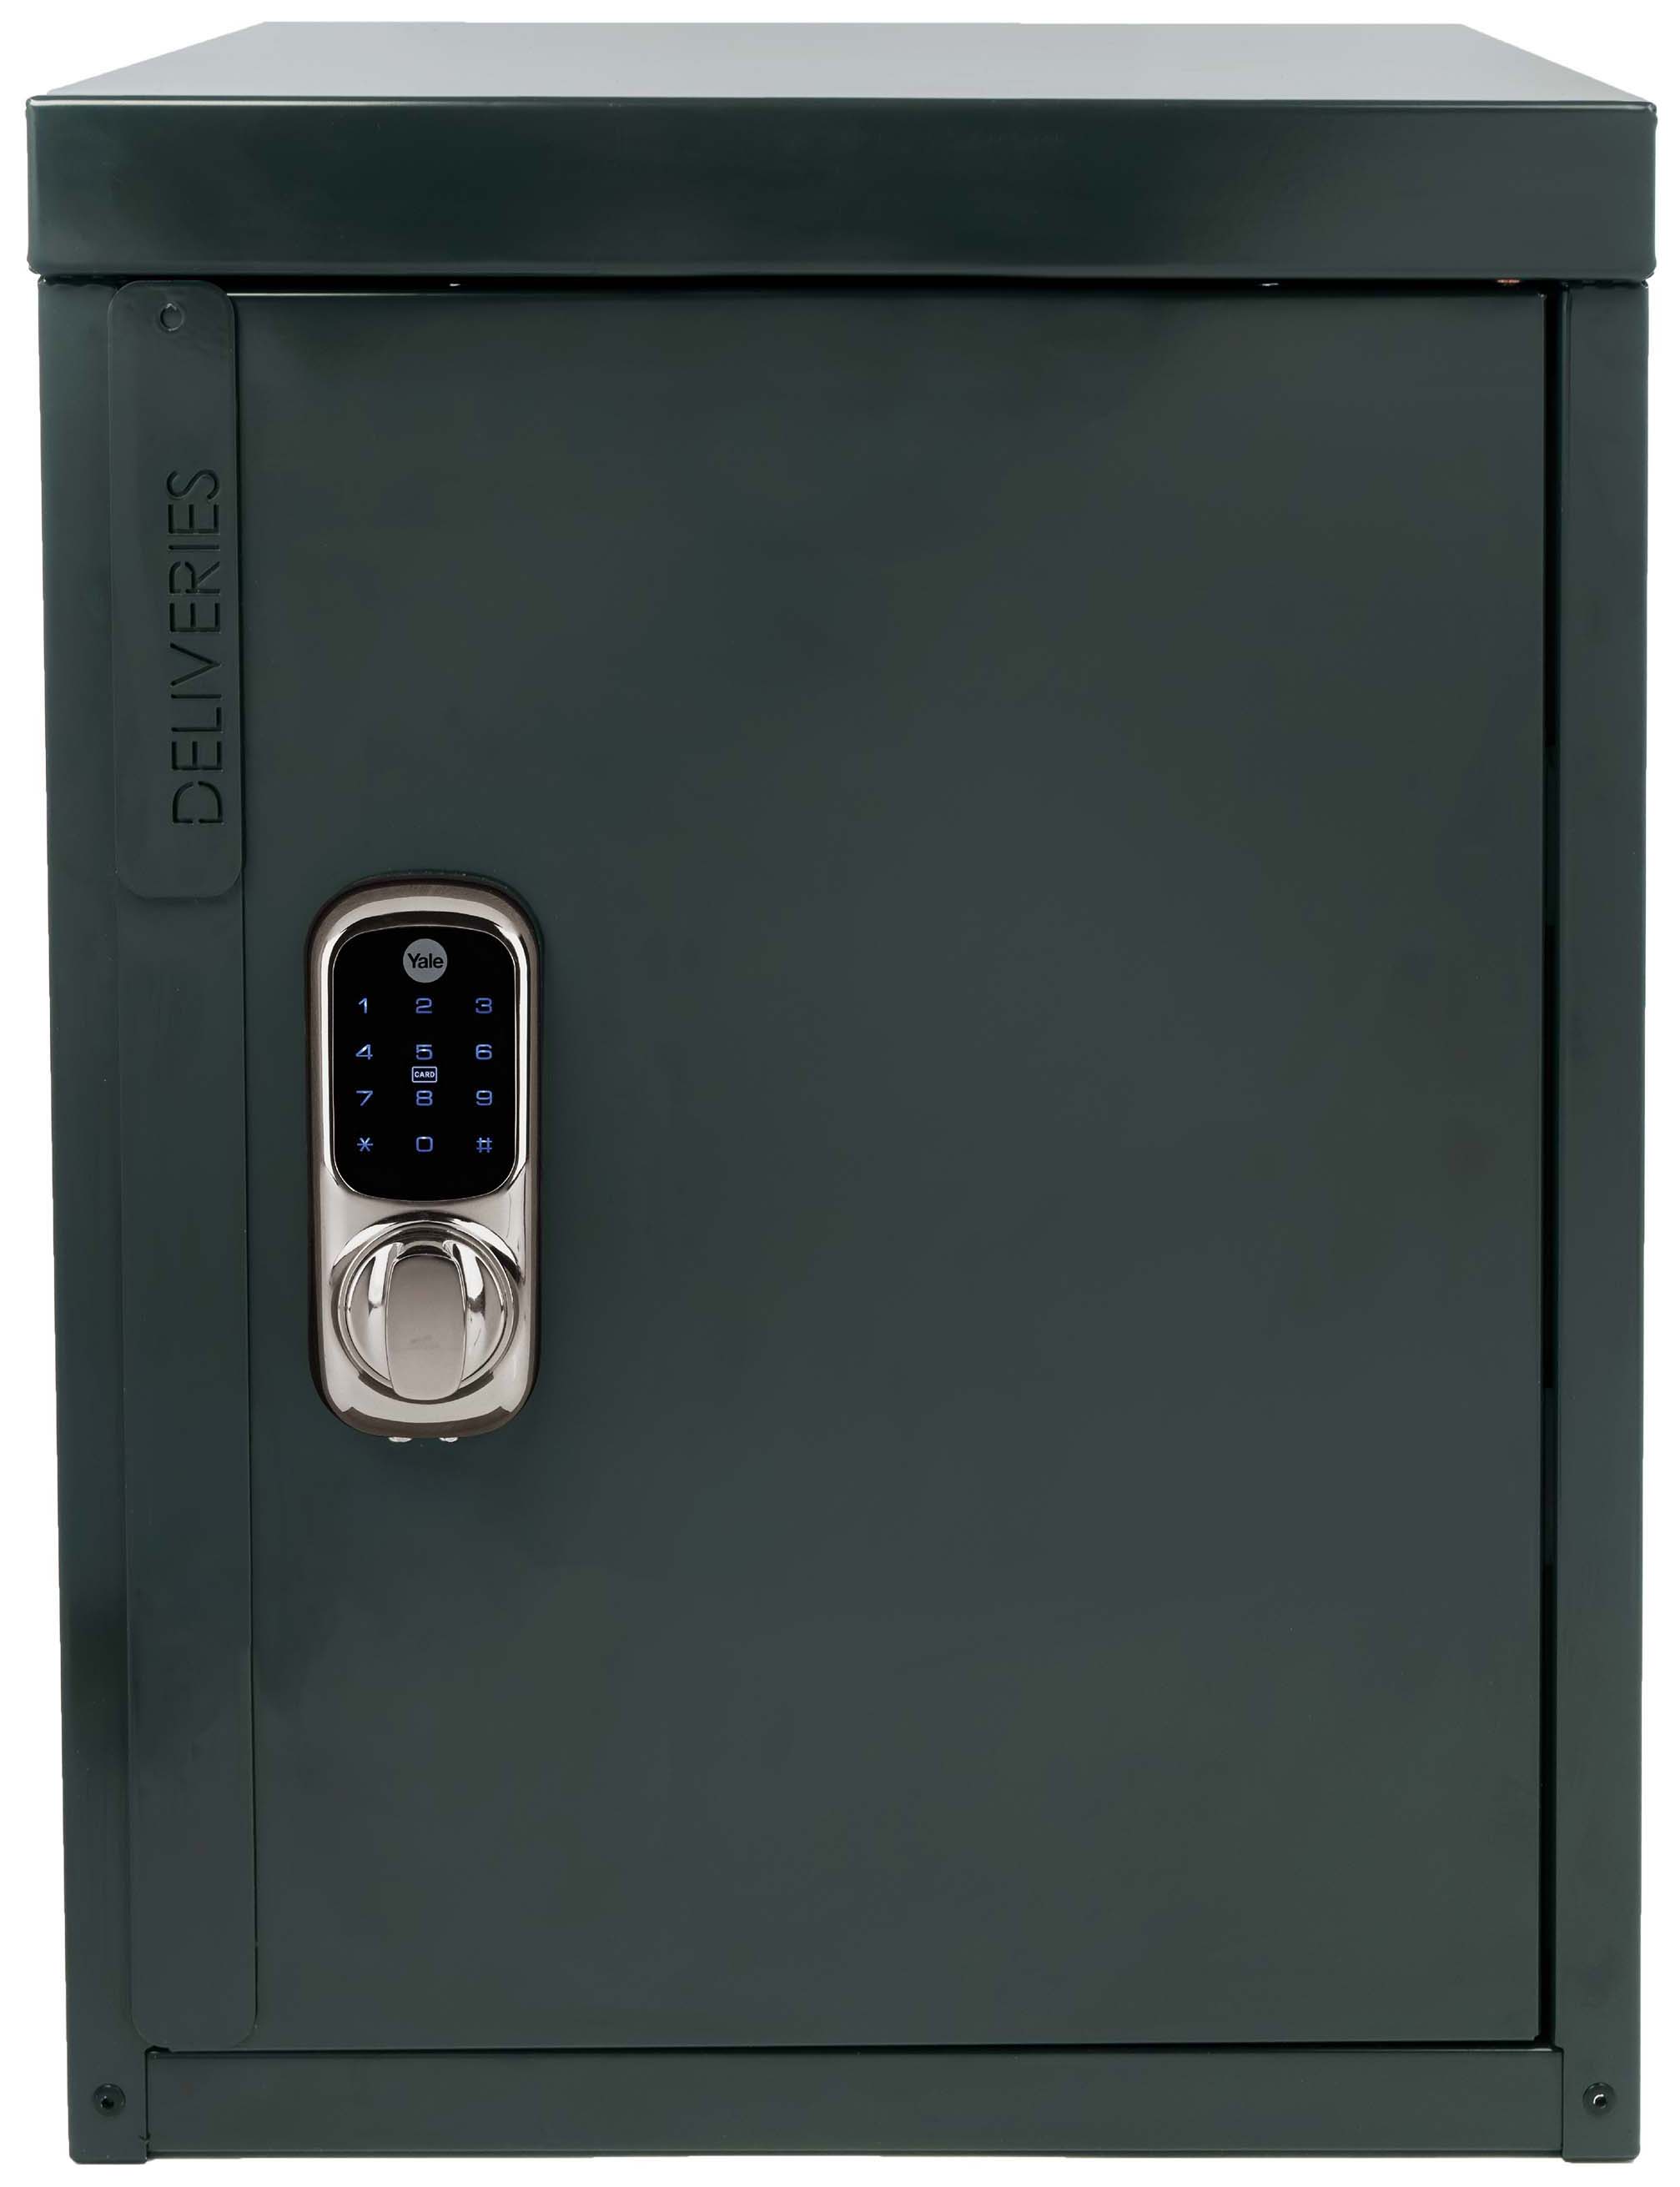 Yale Smart Delivery Box with Chrome Keyless Lock - Anthracite Grey